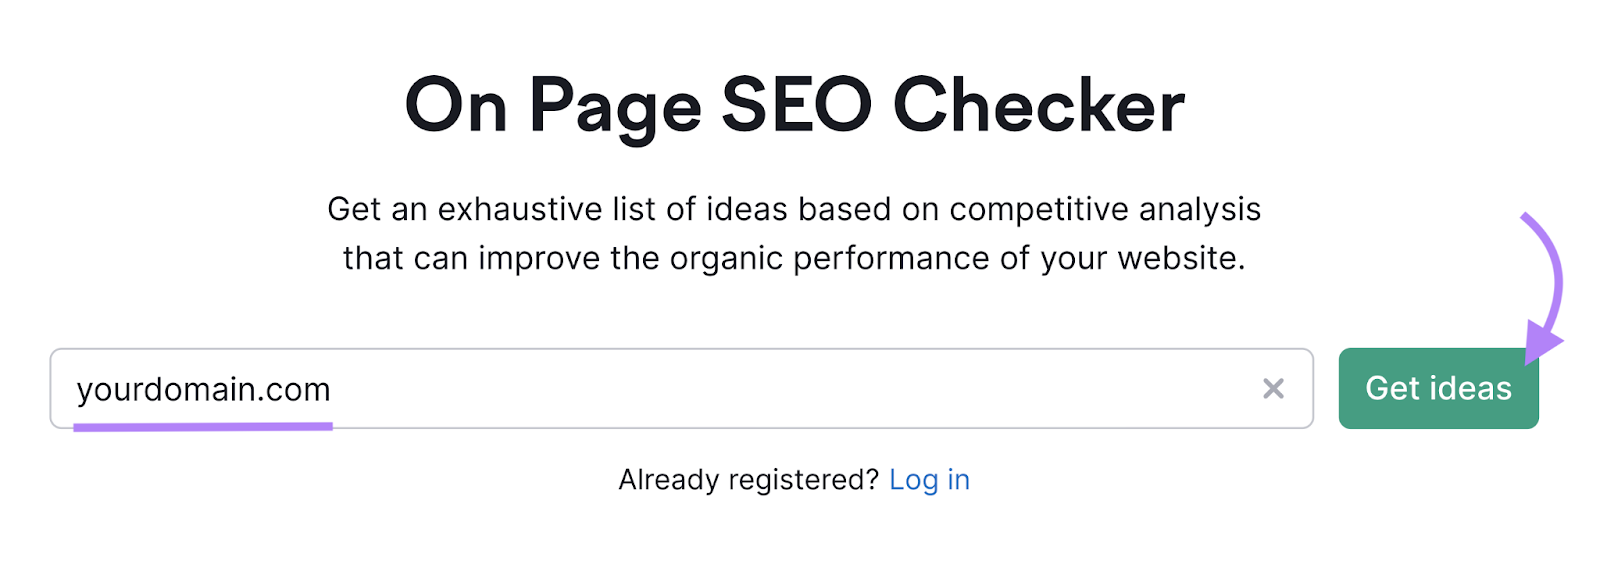 On Page SEO Checker tool search bar